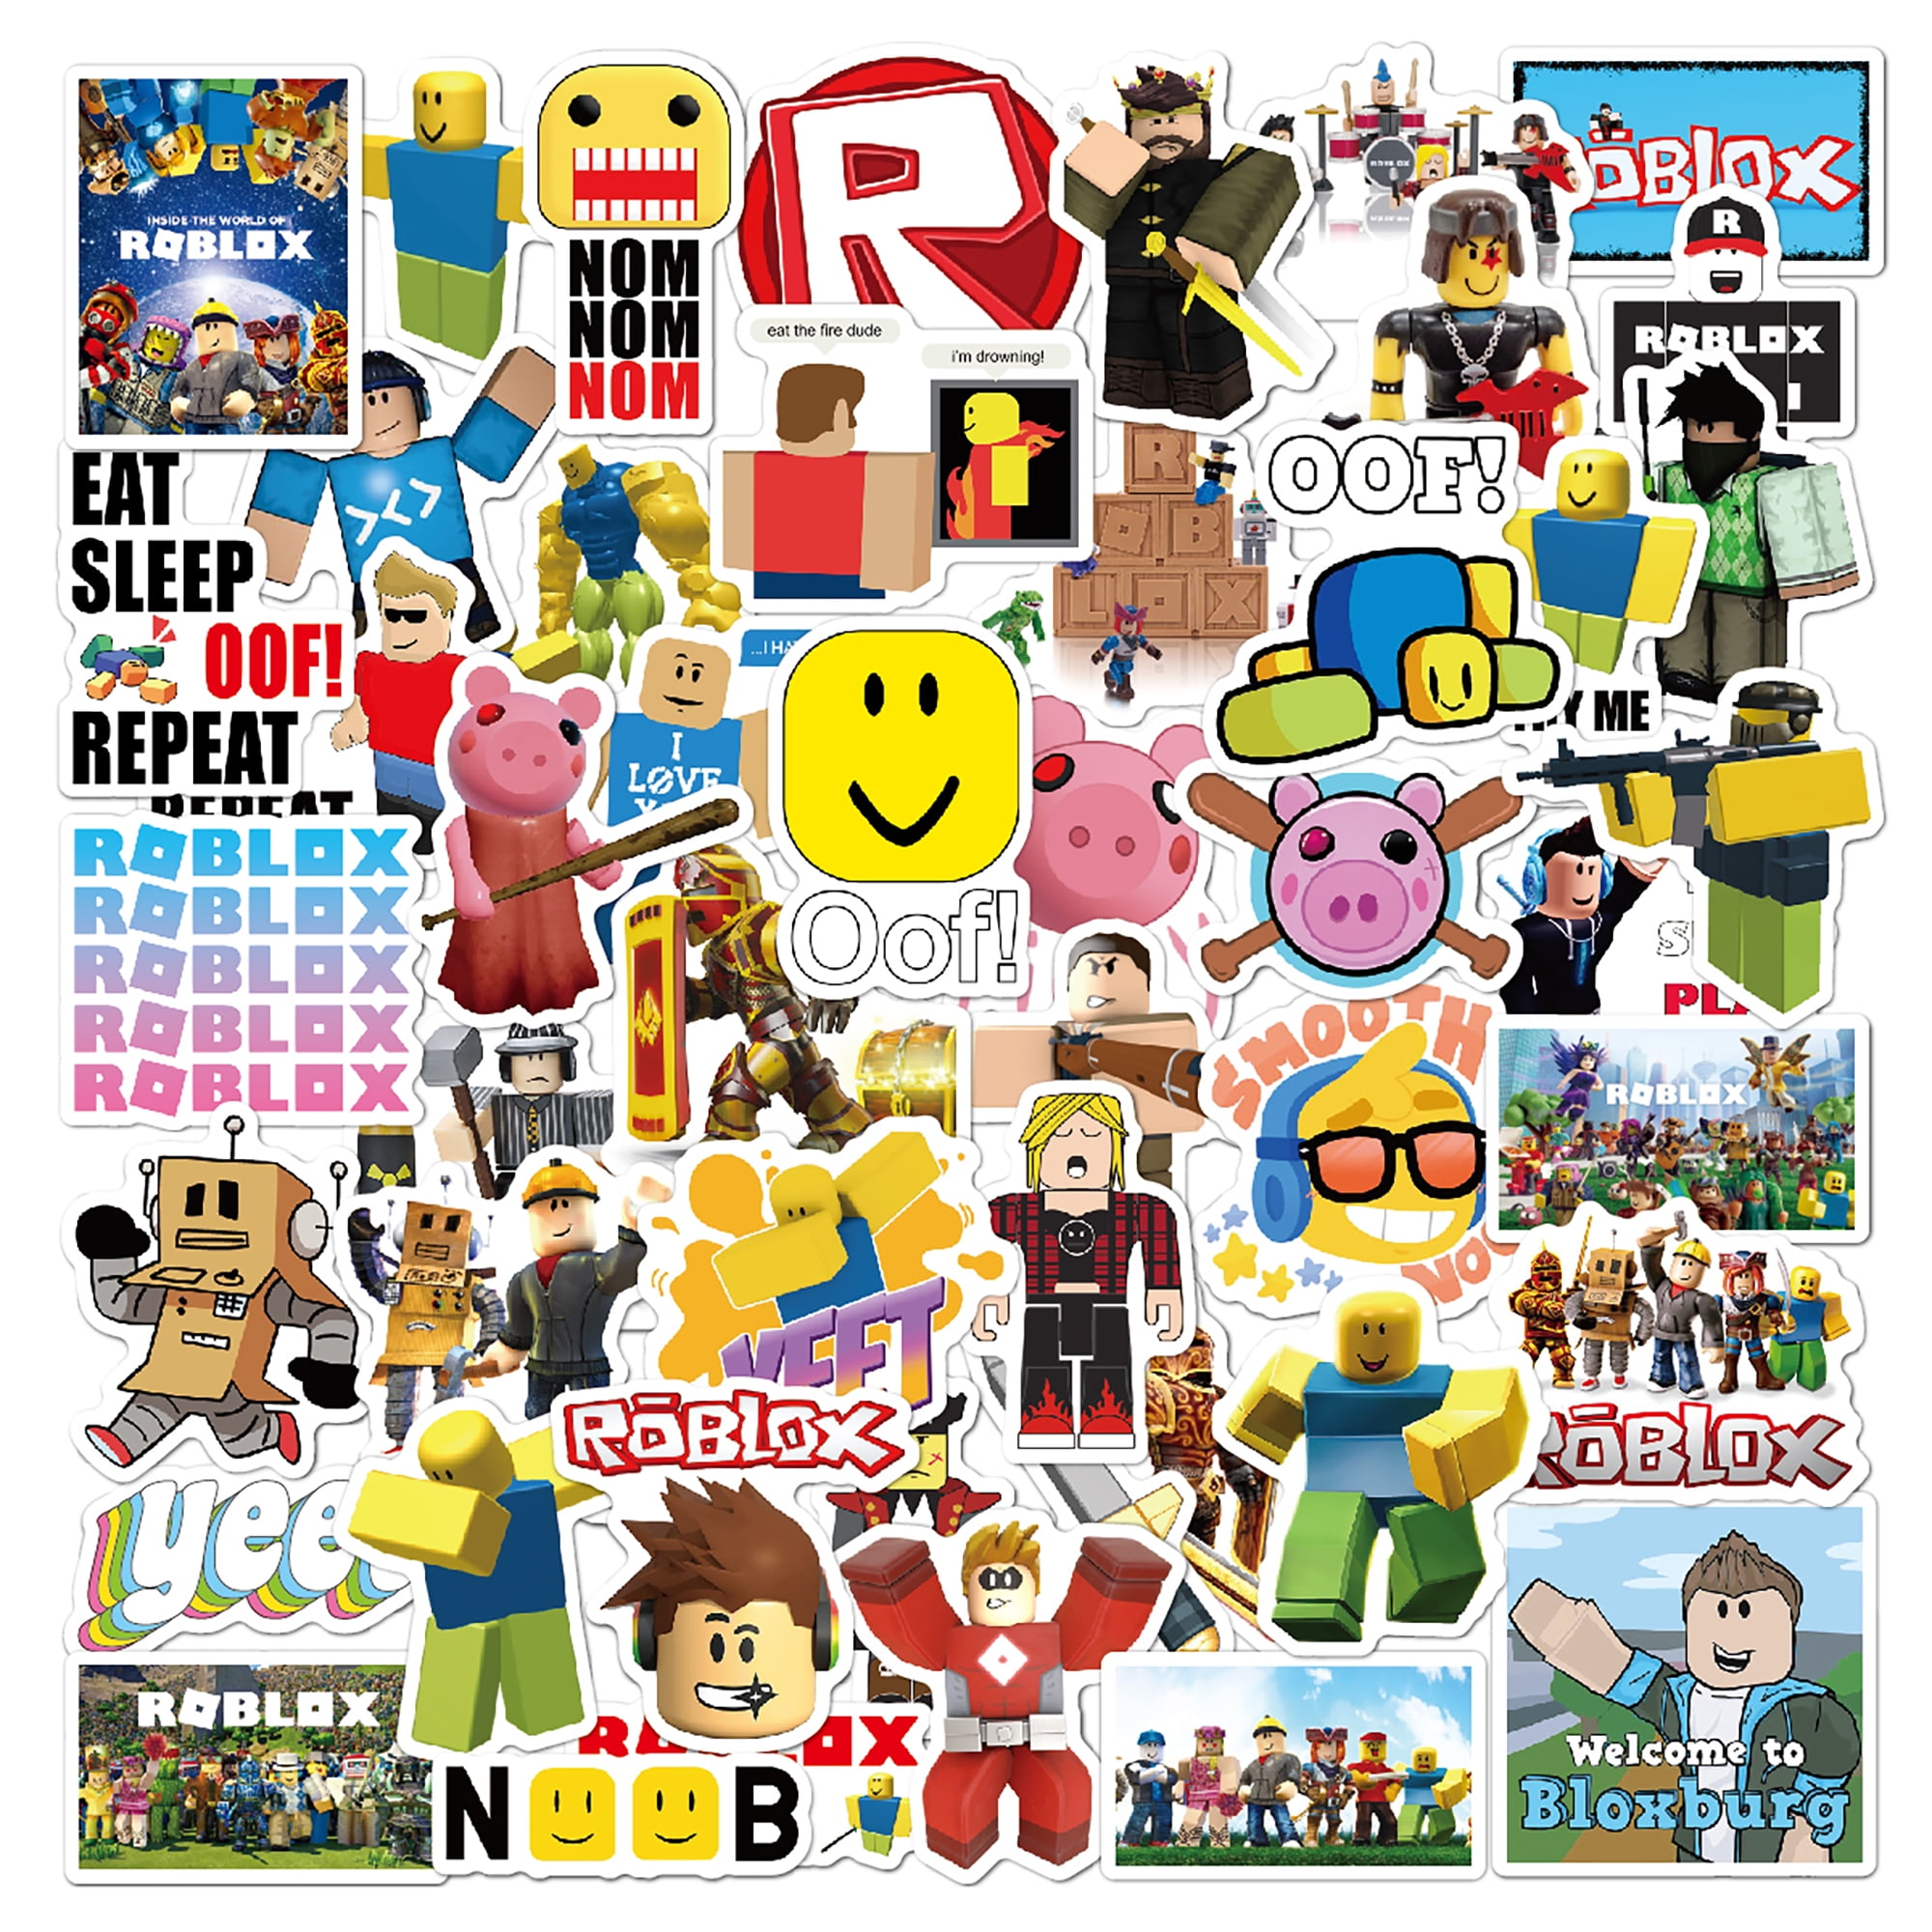 Roblox Sticker Pack 100pcs Sticker Decals Best Gift For Kids Children Teens Waterproof Online Gaming Stickers Pack For Home Decor Phone Hydro Flasks Water Bottle Bicycle Skateboard Laptop Pads Luggage Walmart Com Walmart Com - roblox shading decal